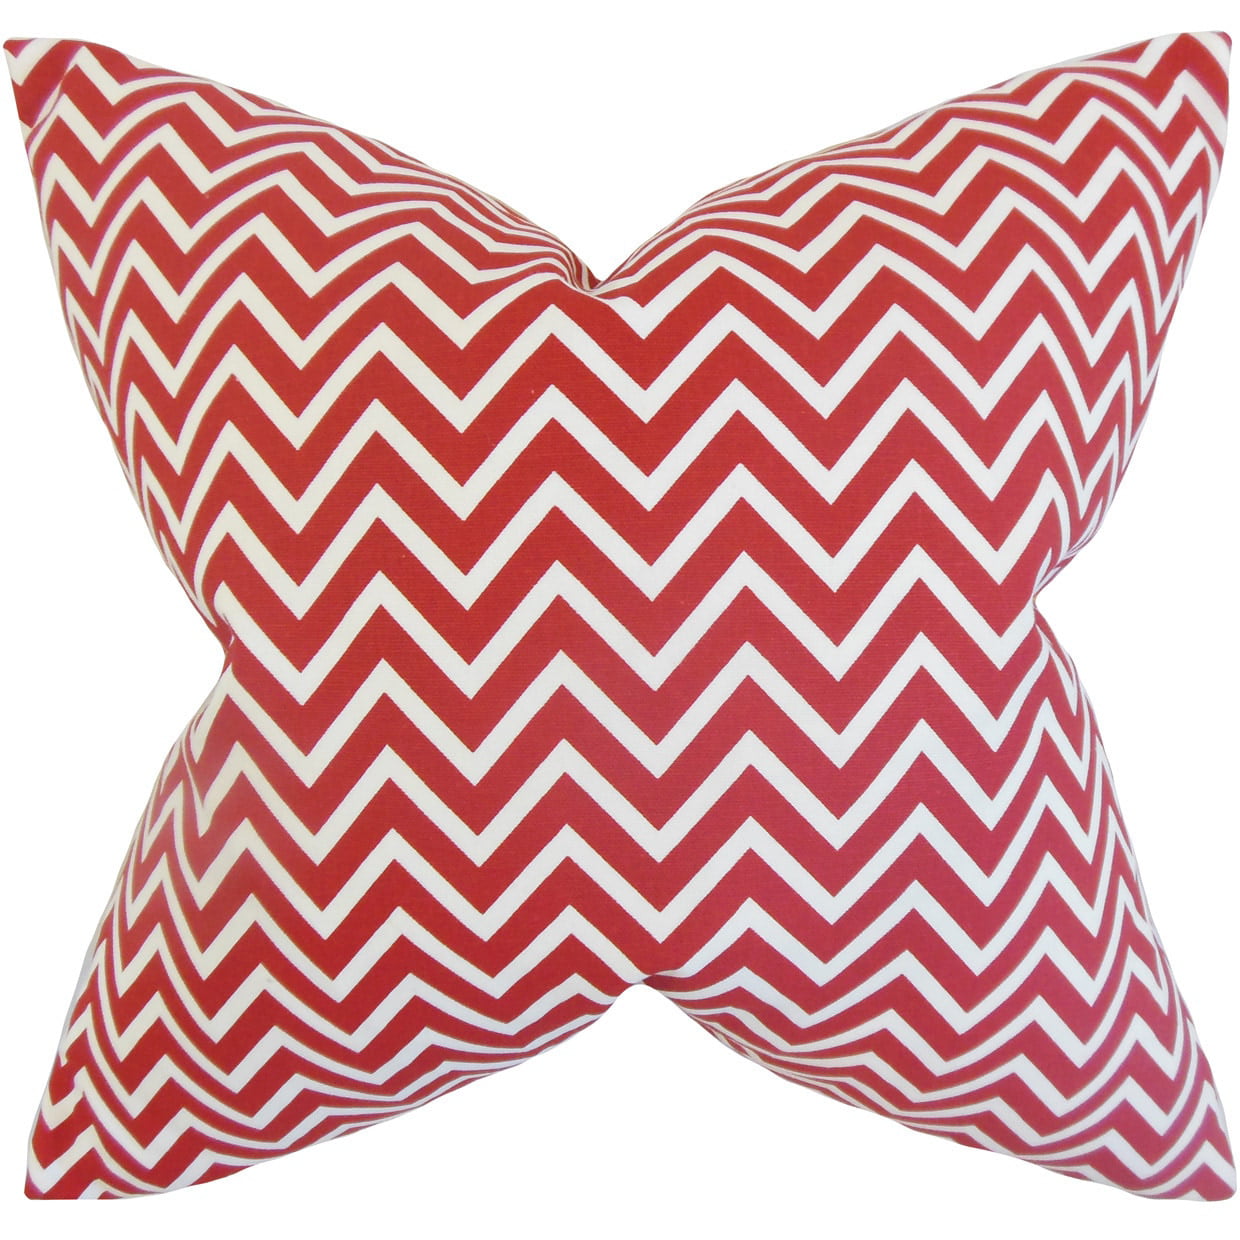 Lipstick The Pillow Collection Sula Zigzag Pillow 